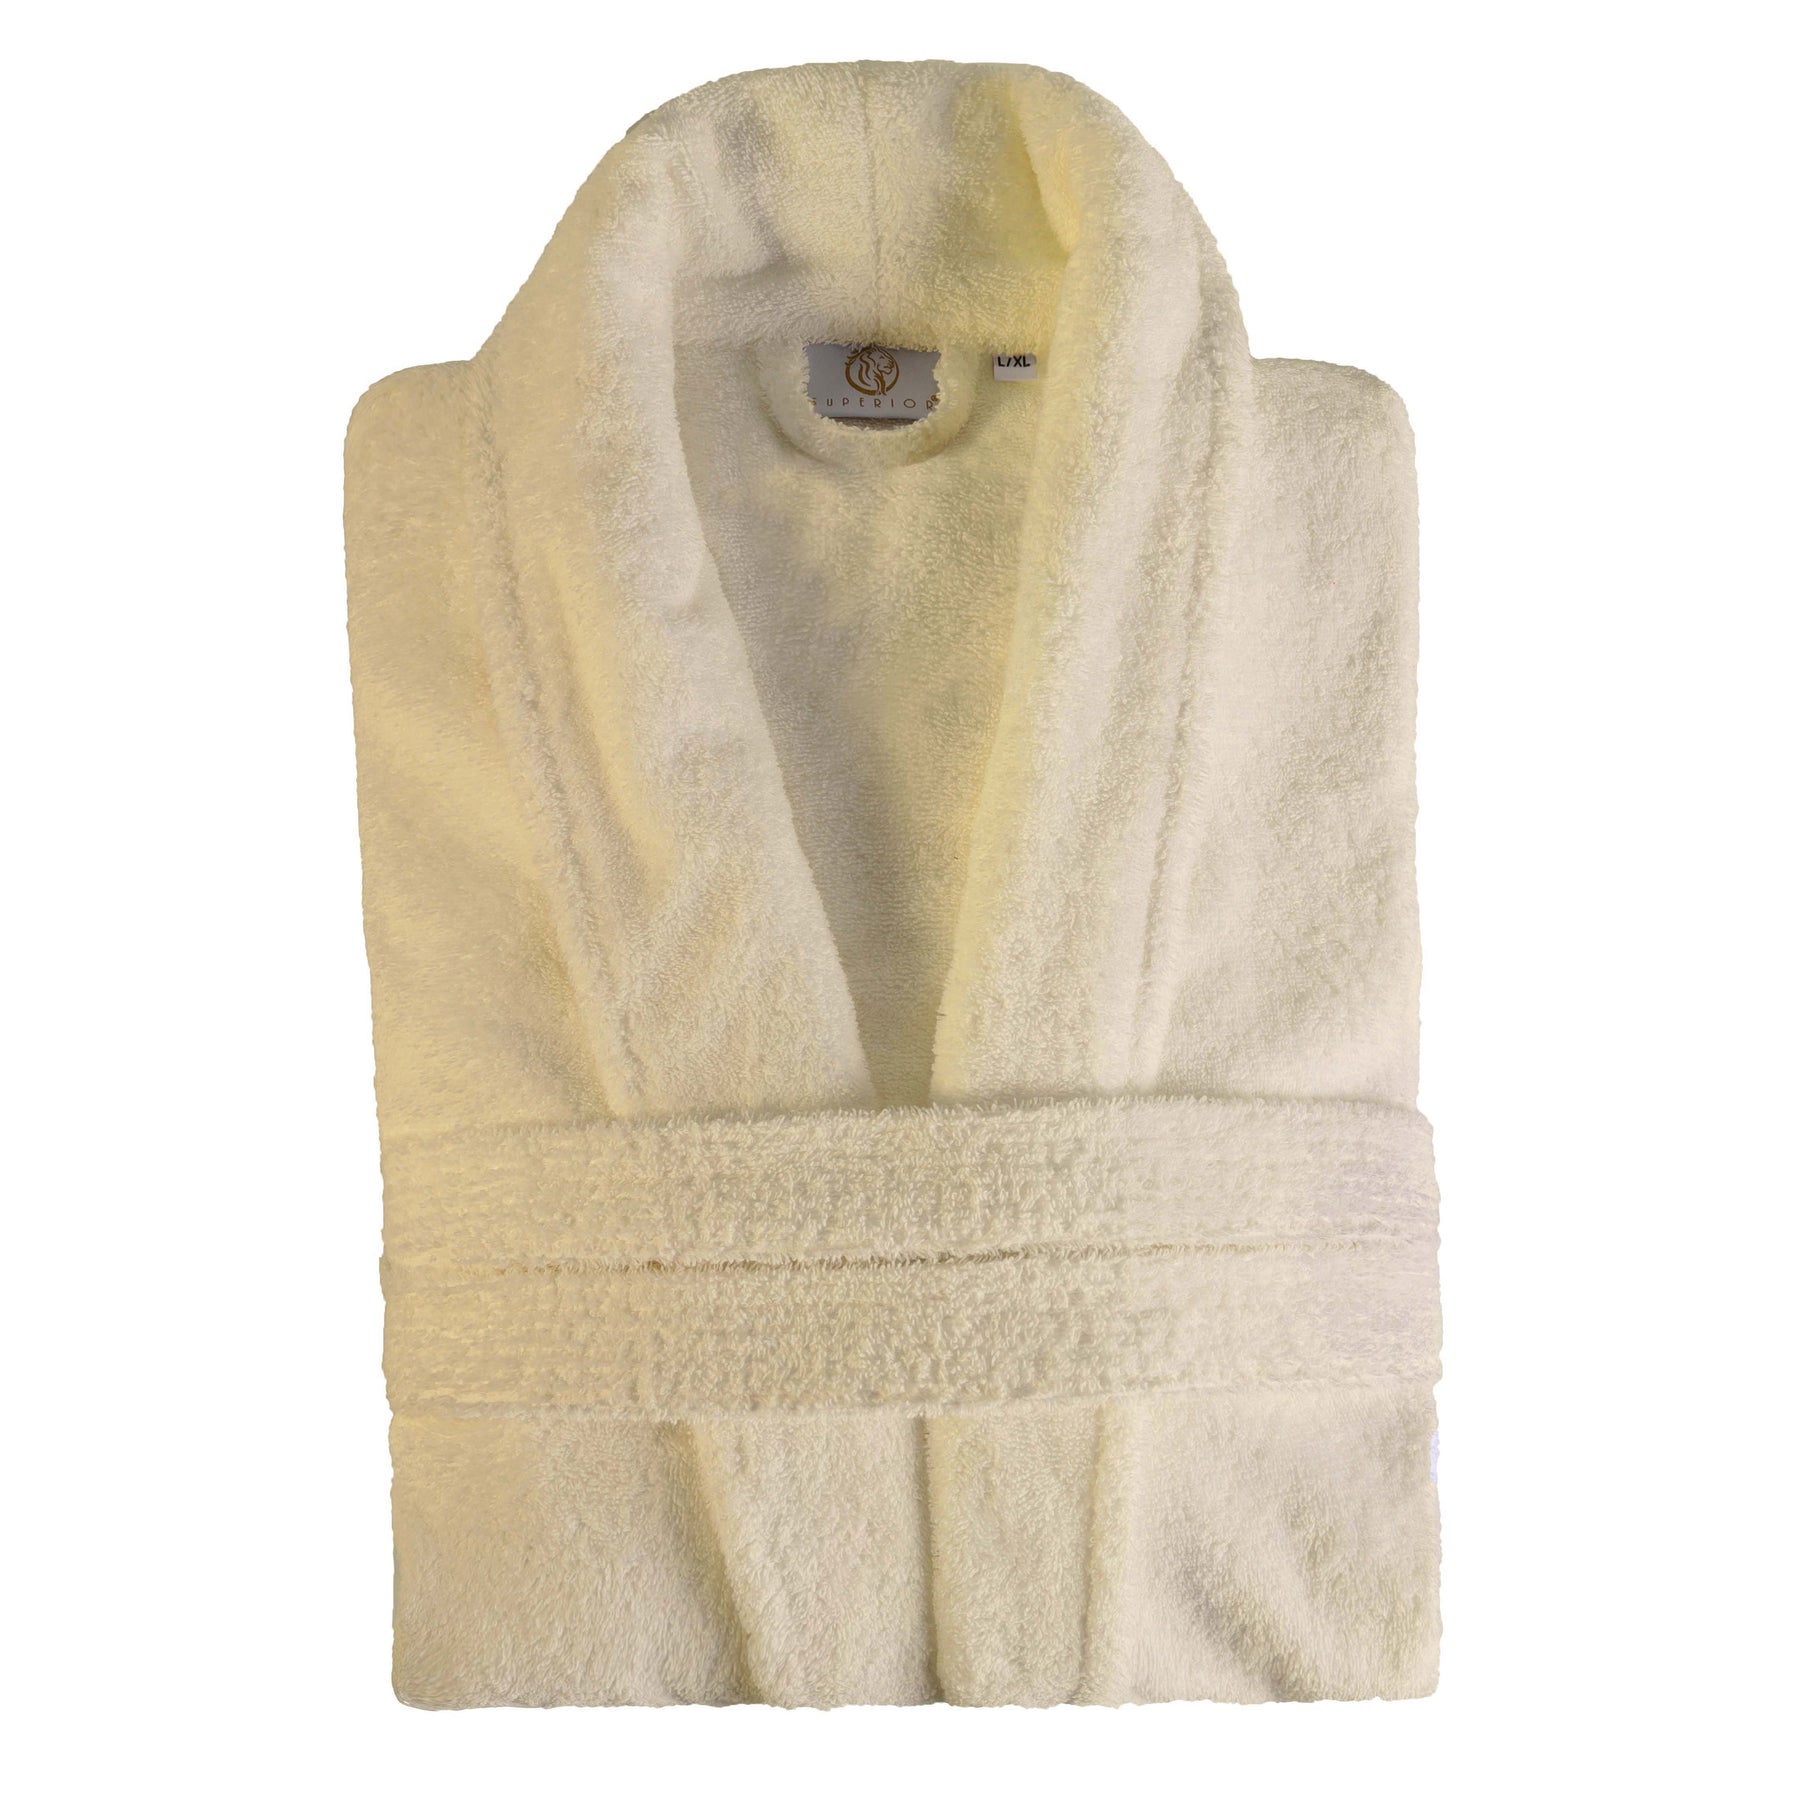 Classic Men's Home and Bath Collection Traditional Turkish Cotton Cozy Bathrobe with Adjustable Belt and Hanging Loop - Ivory